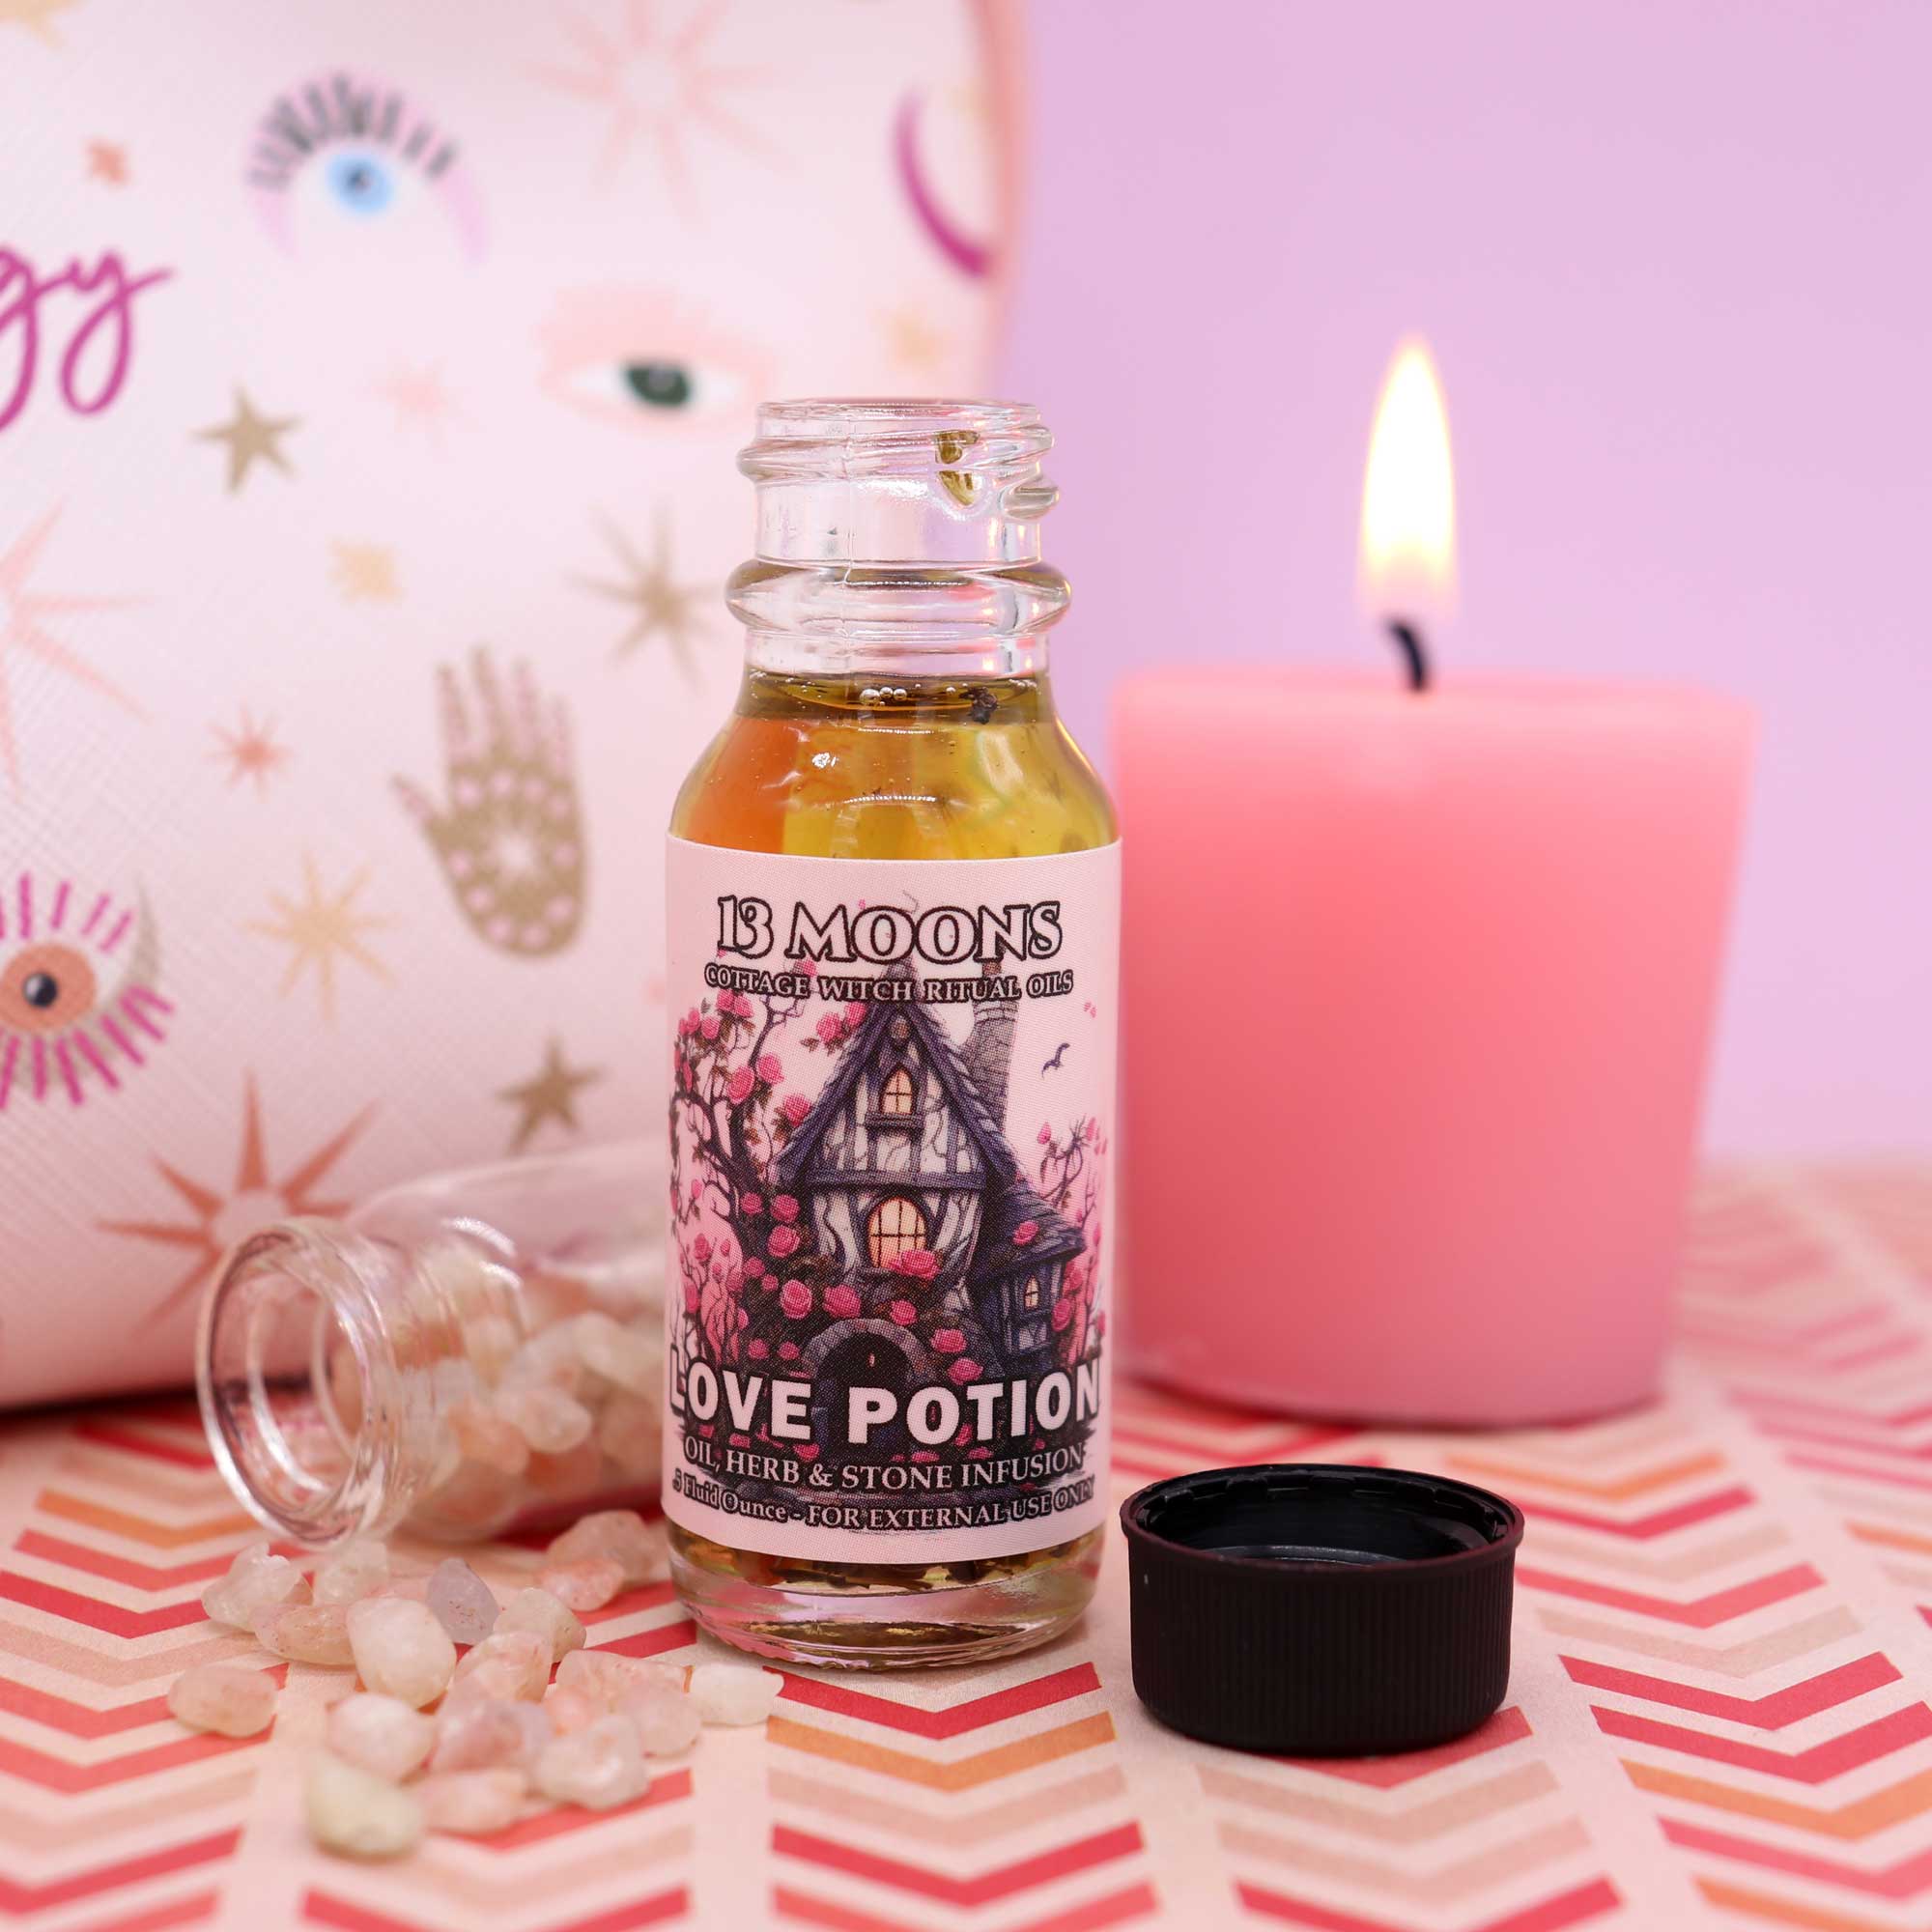 Love Potion Ritual Oil by 13 Moons